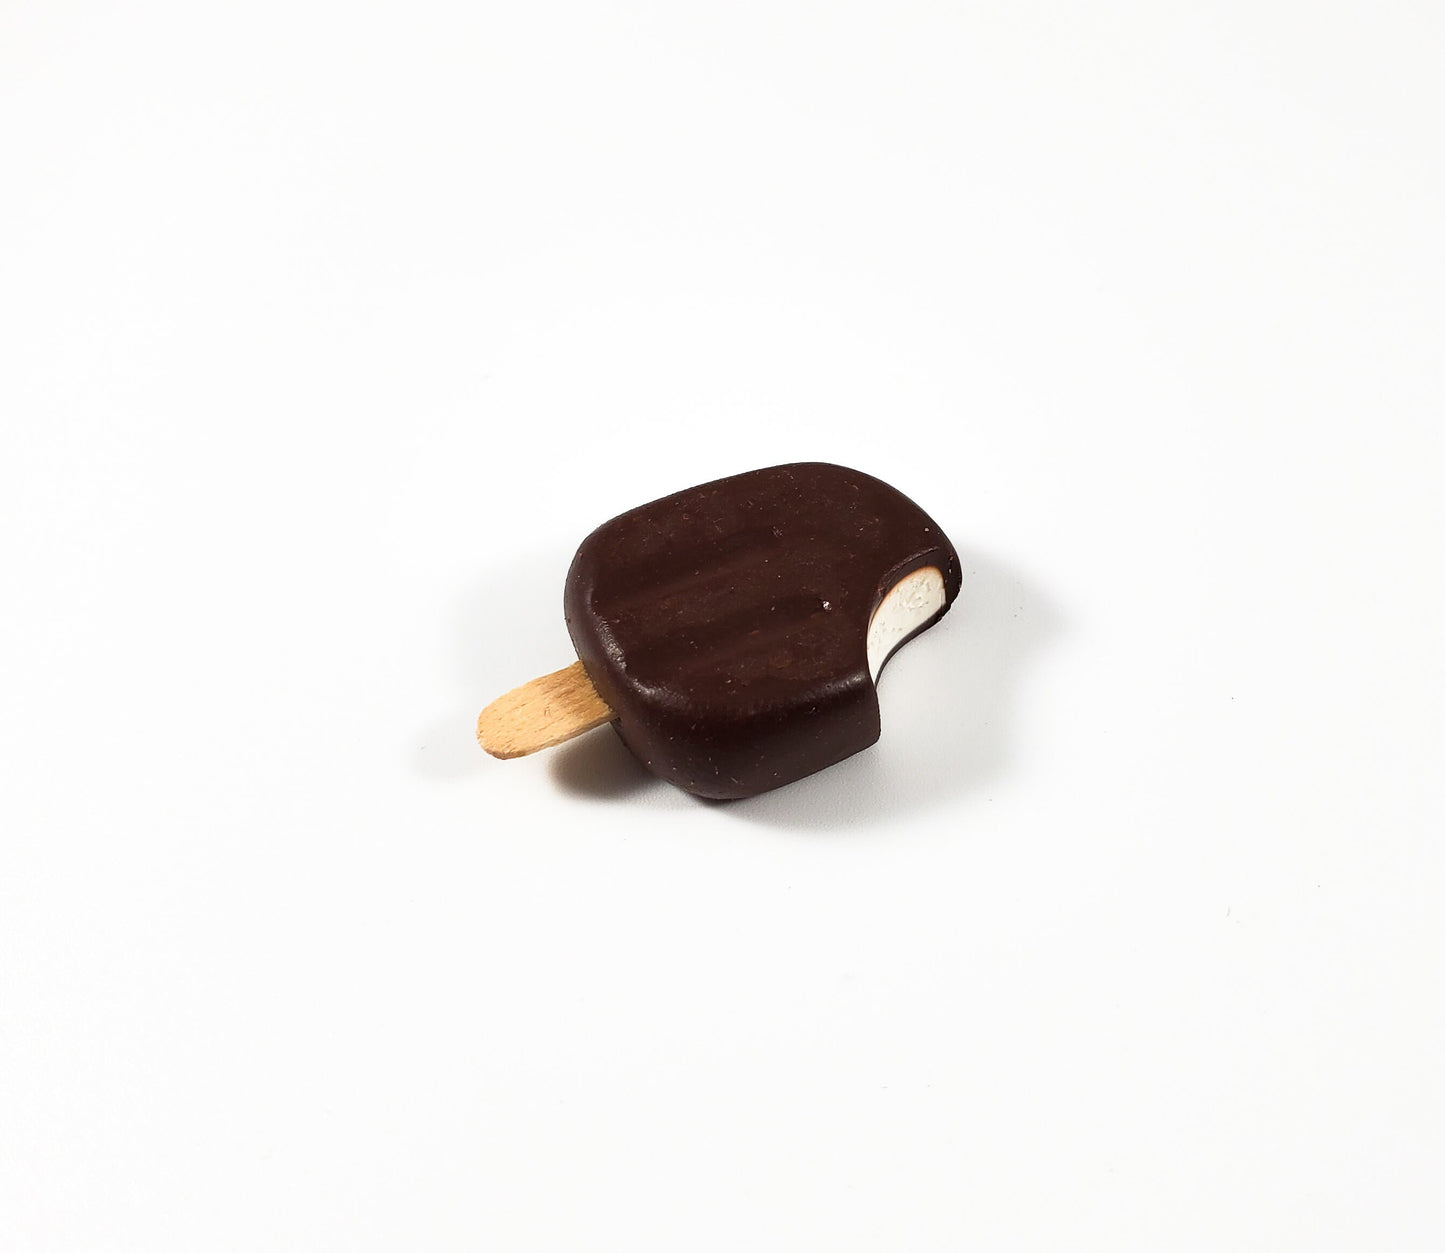 Chocolate popsicle pin